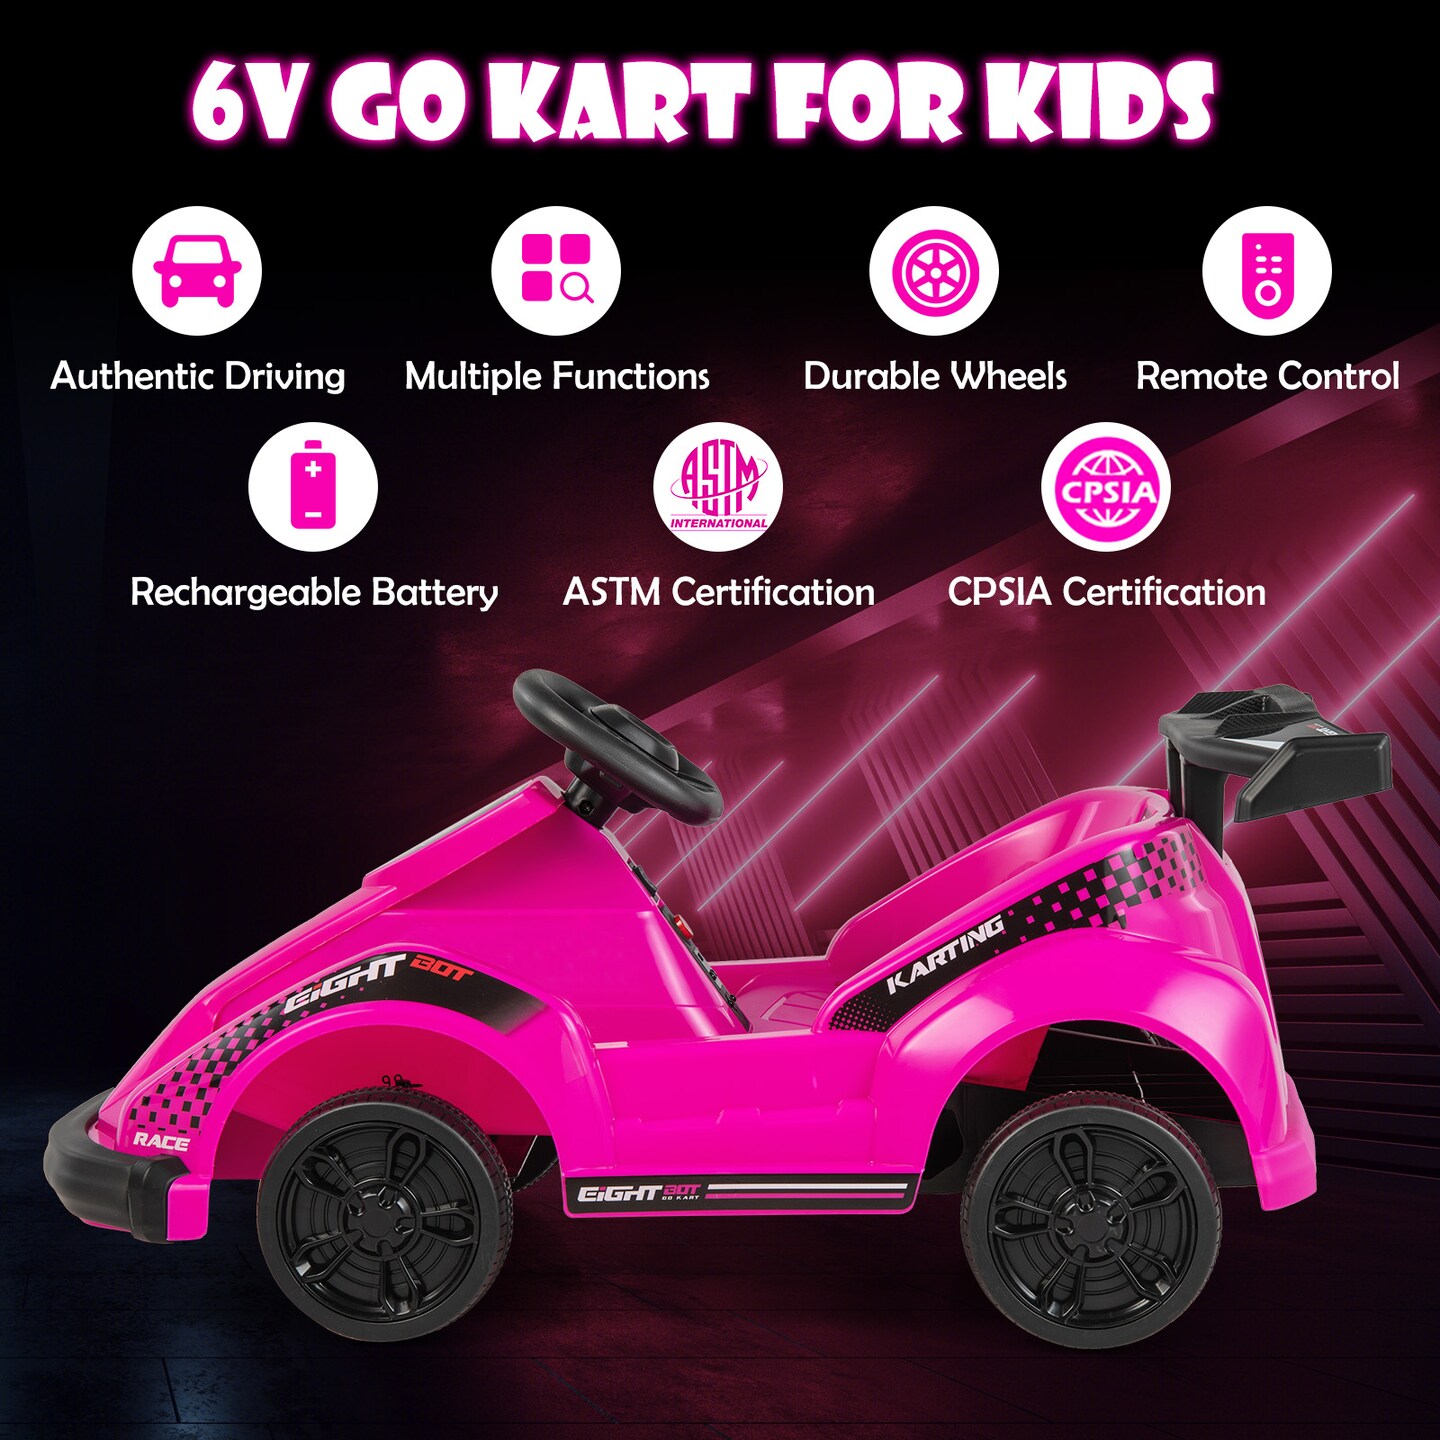 6V Kids Ride On Go Cart with Remote Control and Safety Belt